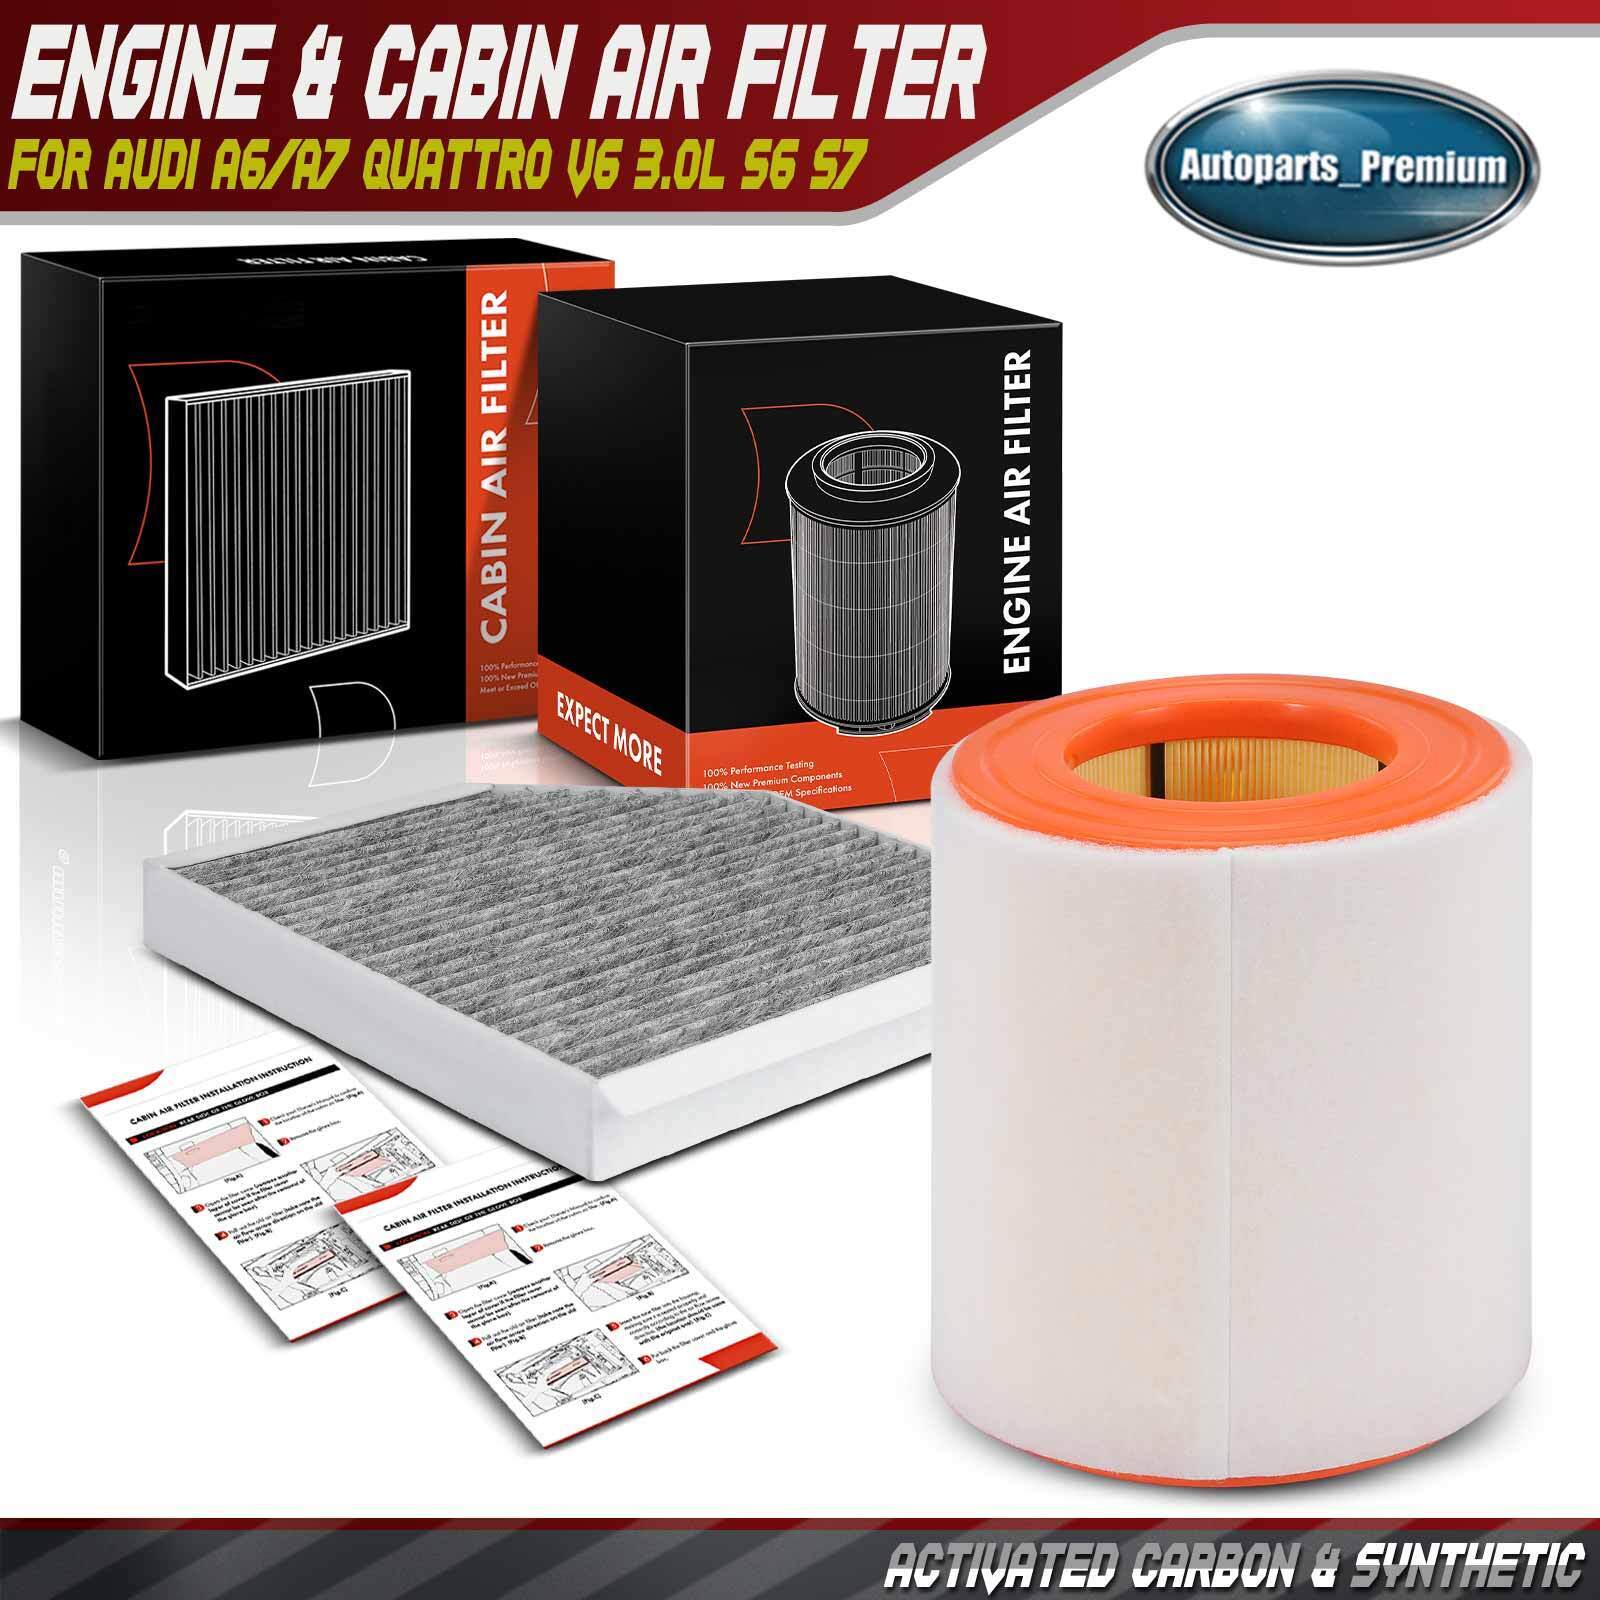 Engine & Cabin Air Filter with Activated Carbon for Audi A6/A7 Quattro S6 S7